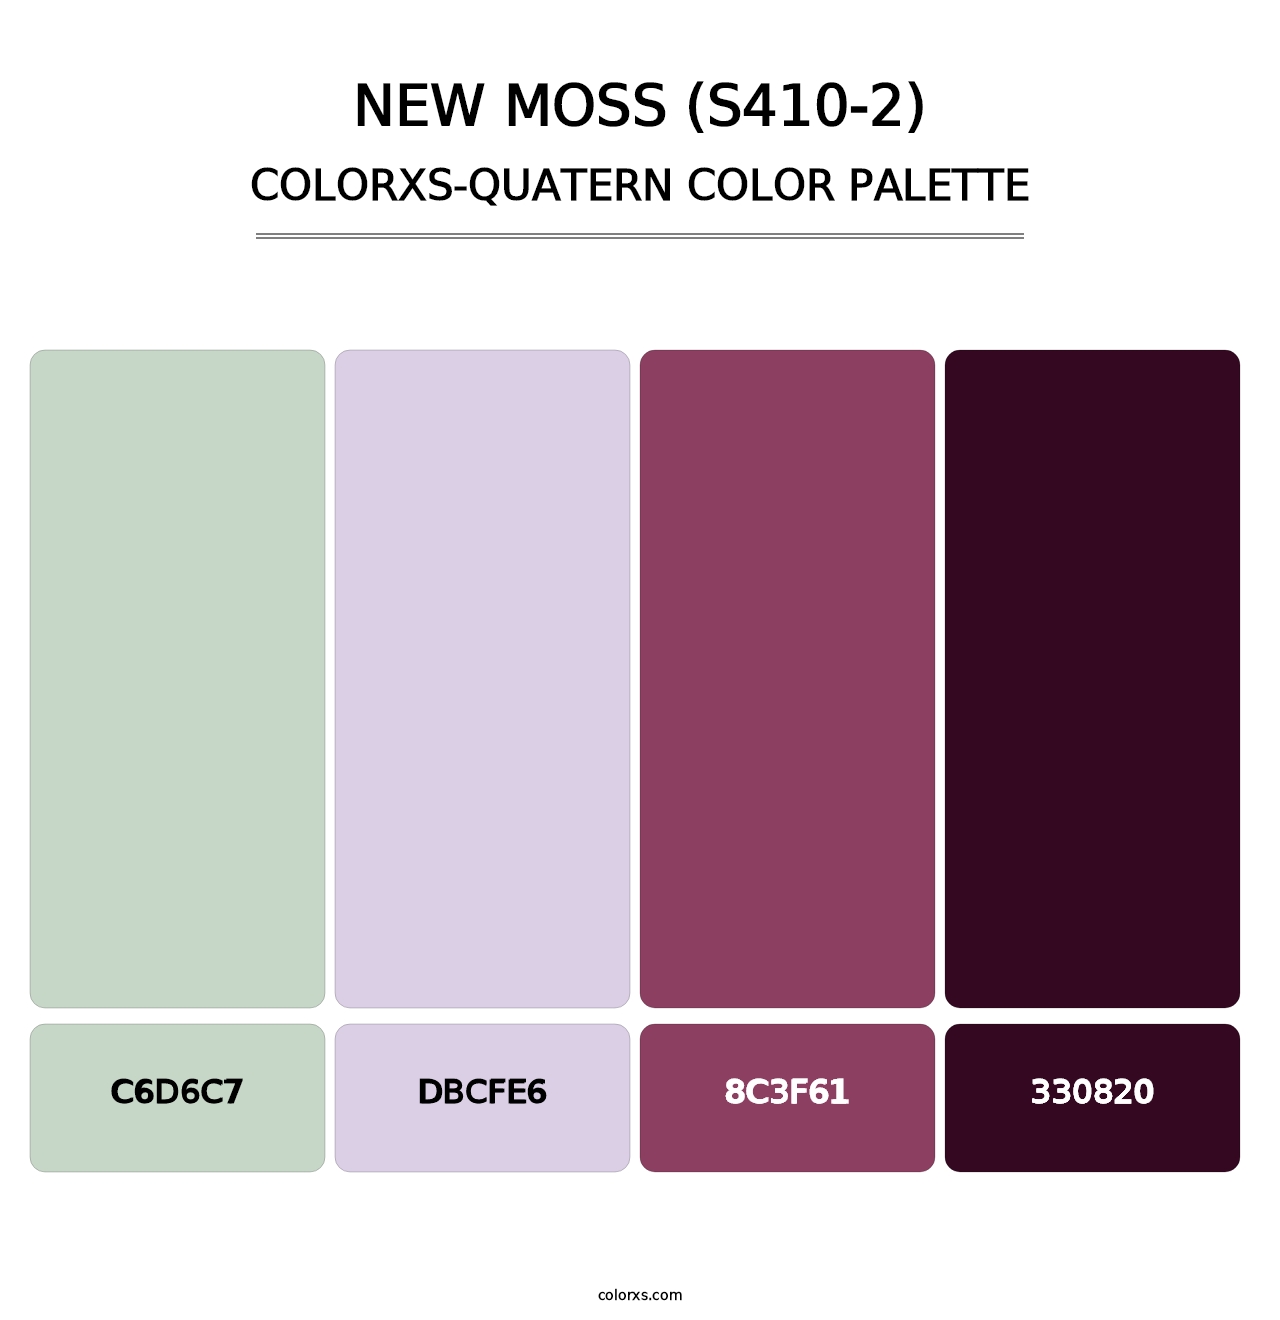 New Moss (S410-2) - Colorxs Quatern Palette